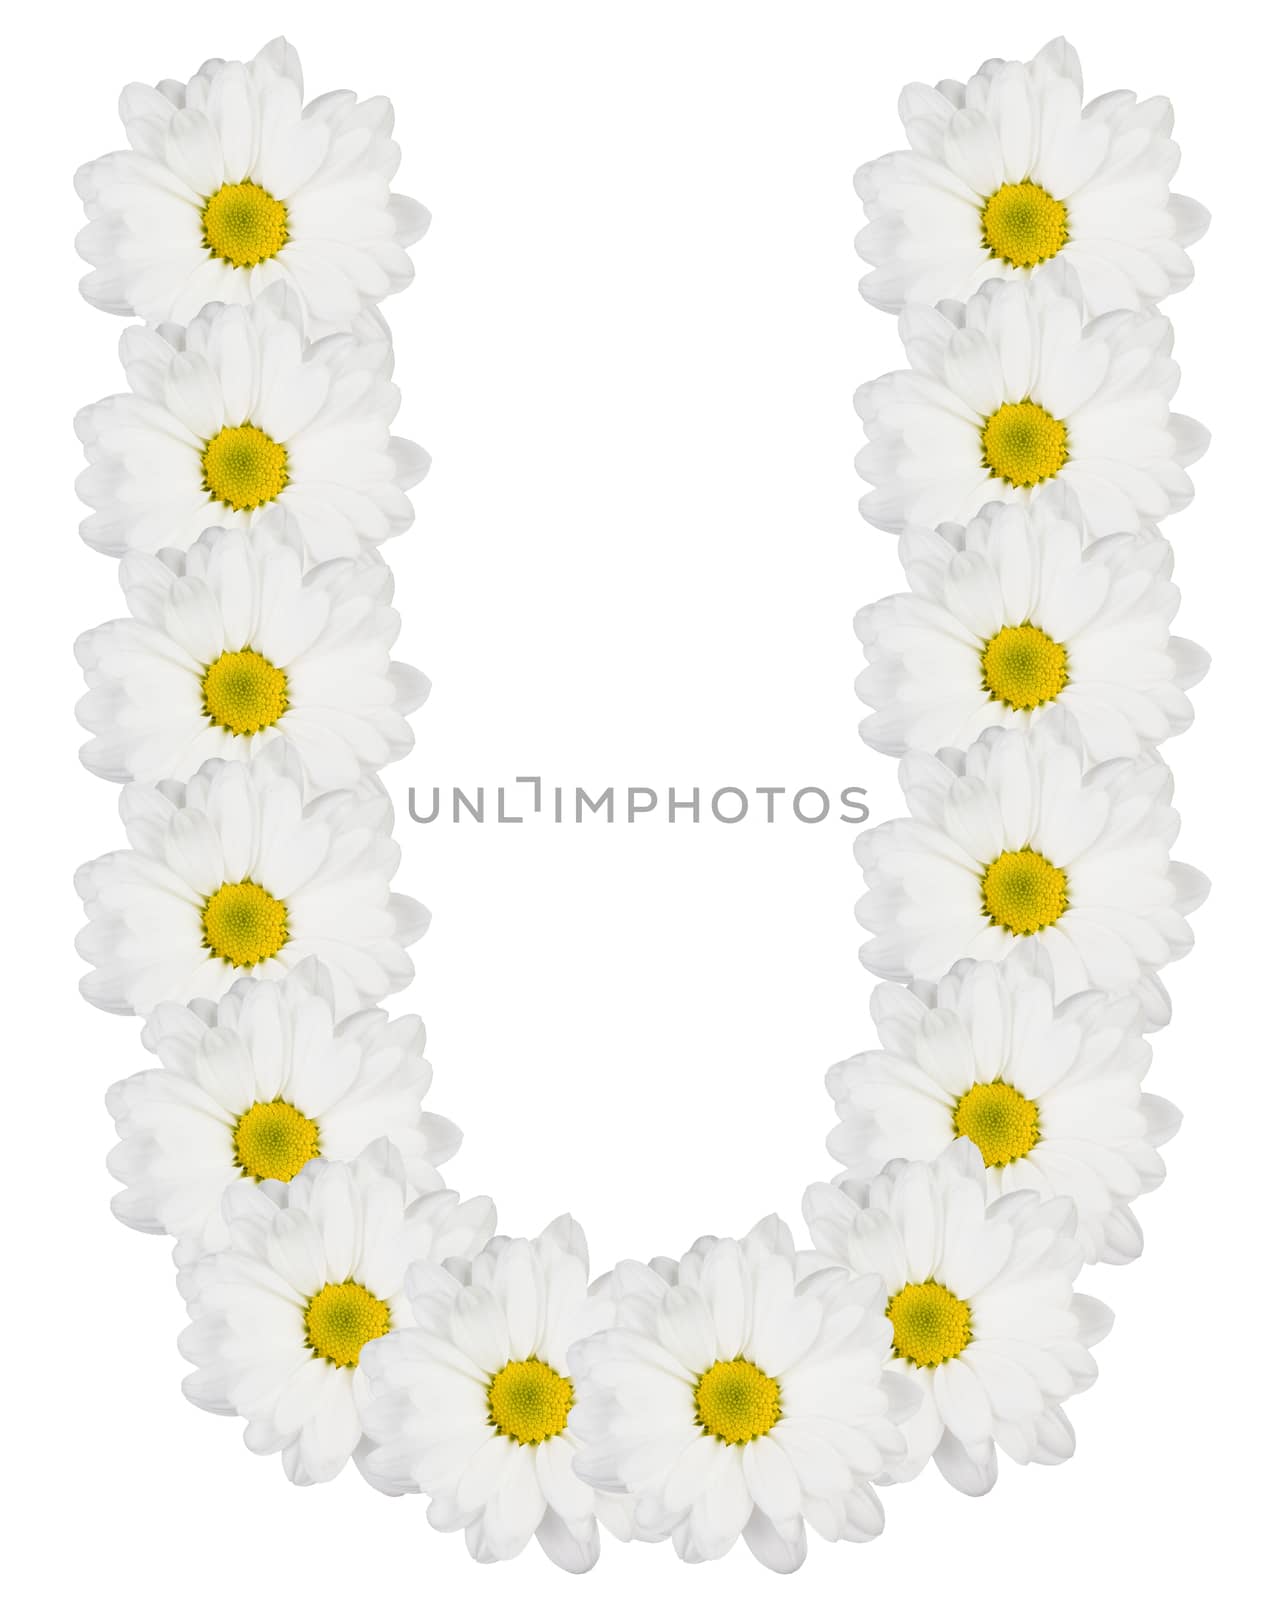 Letter U made from white flowers